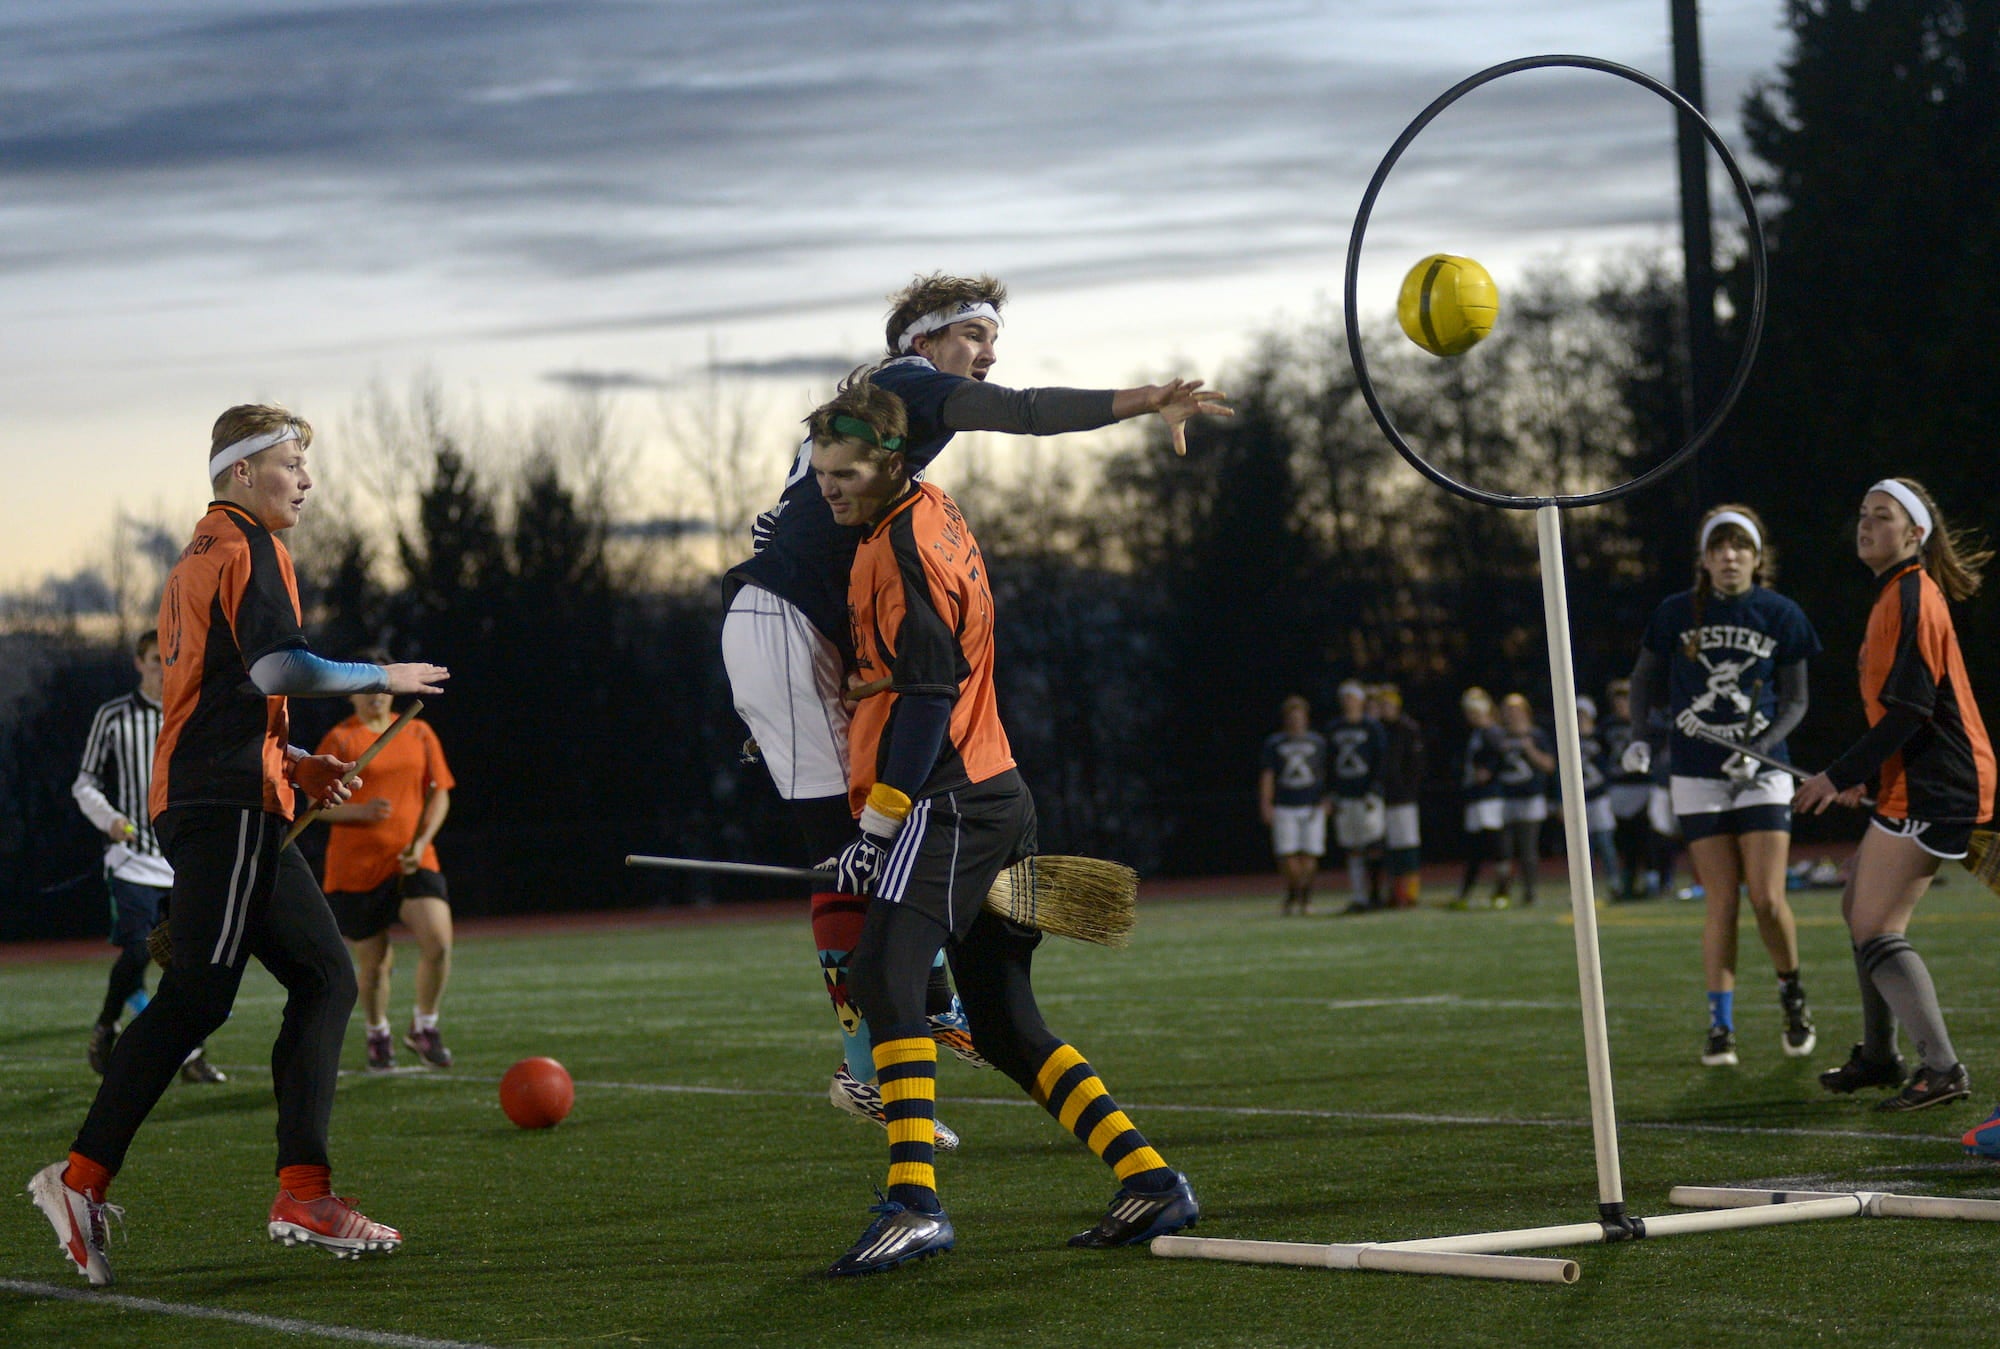 students wearing sports uniforms while playing real life quidditch